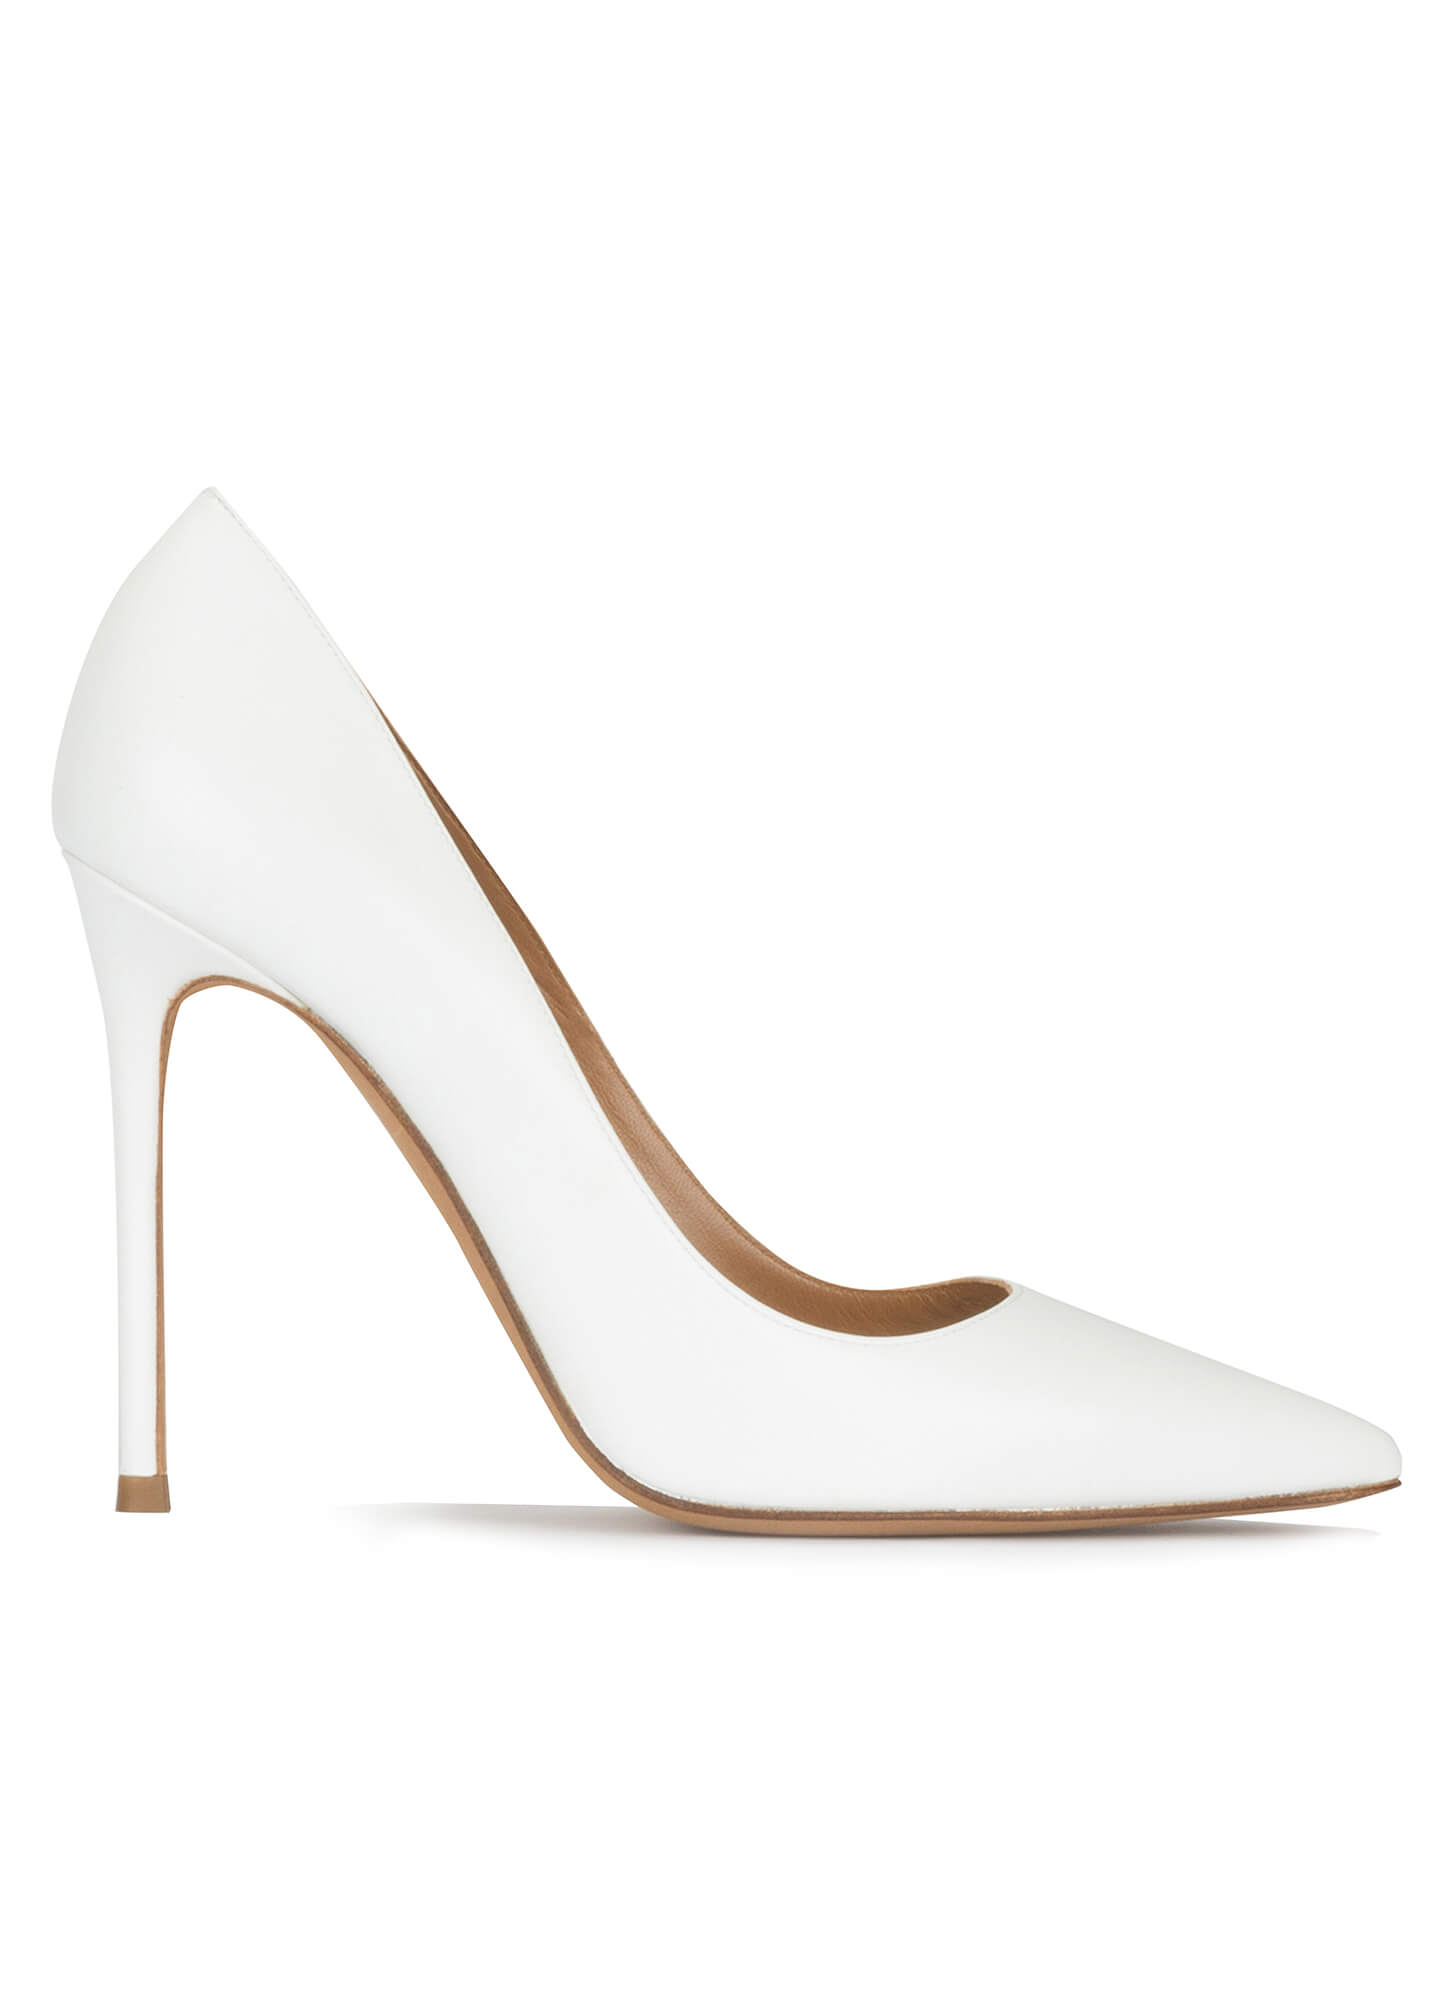 Women's Pumps: Iconic Heels for Every Occasion | Ghazal